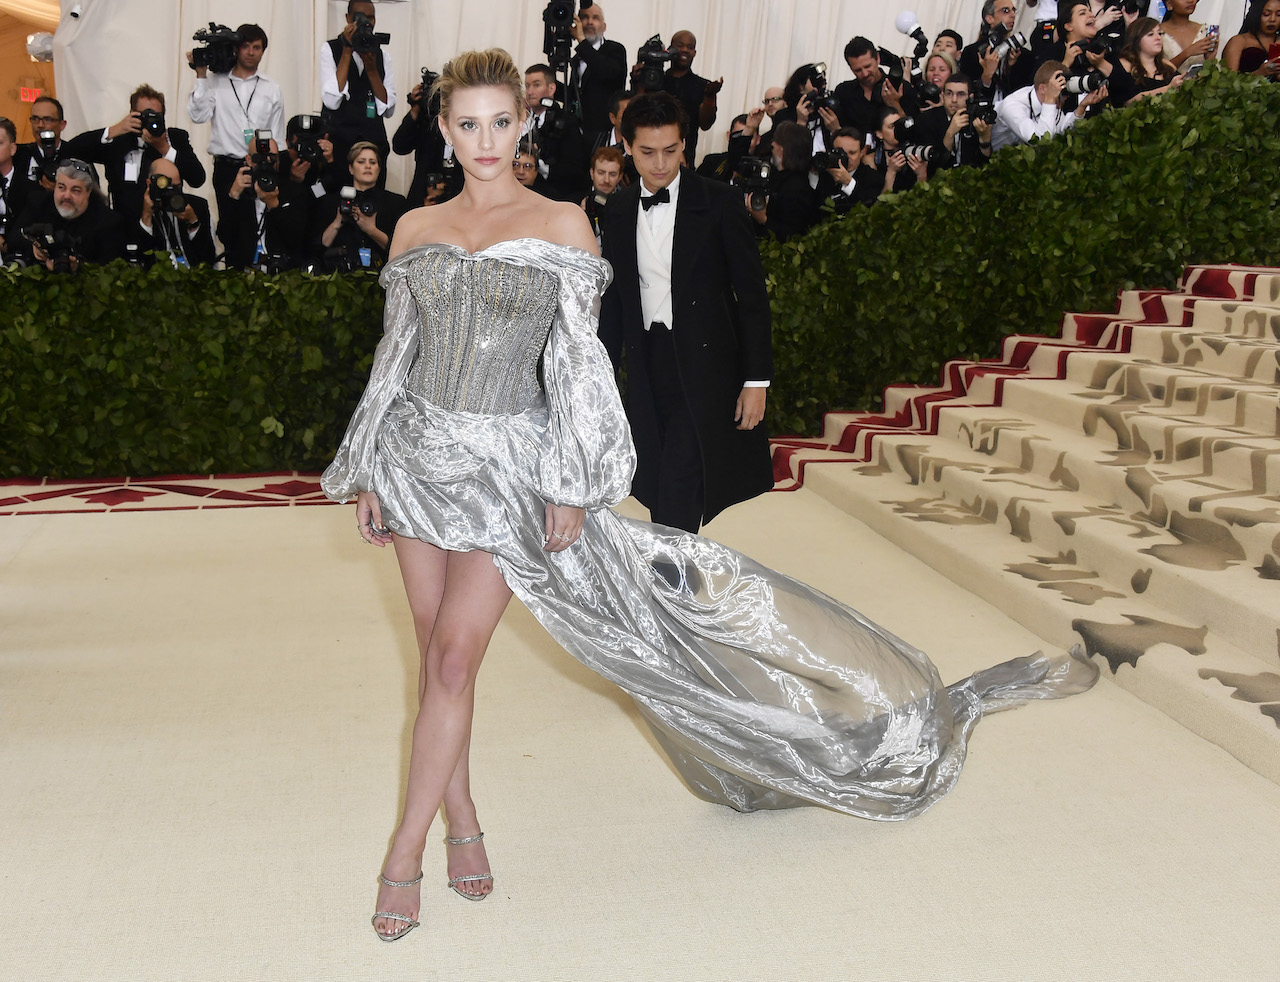 Actress Lili Reinhart wore a silver dress inspired by armour. A cloud-like drape of silver lamé organza was held by a silver corset, creating a dramatic contrast between control and flow. The corset was decorated with chunky metal chains in antique silver, while silver lame organza was draped first as a mini-skirt, before billowing into a long train. (Photo by Frazer Harrison/FilmMagic)